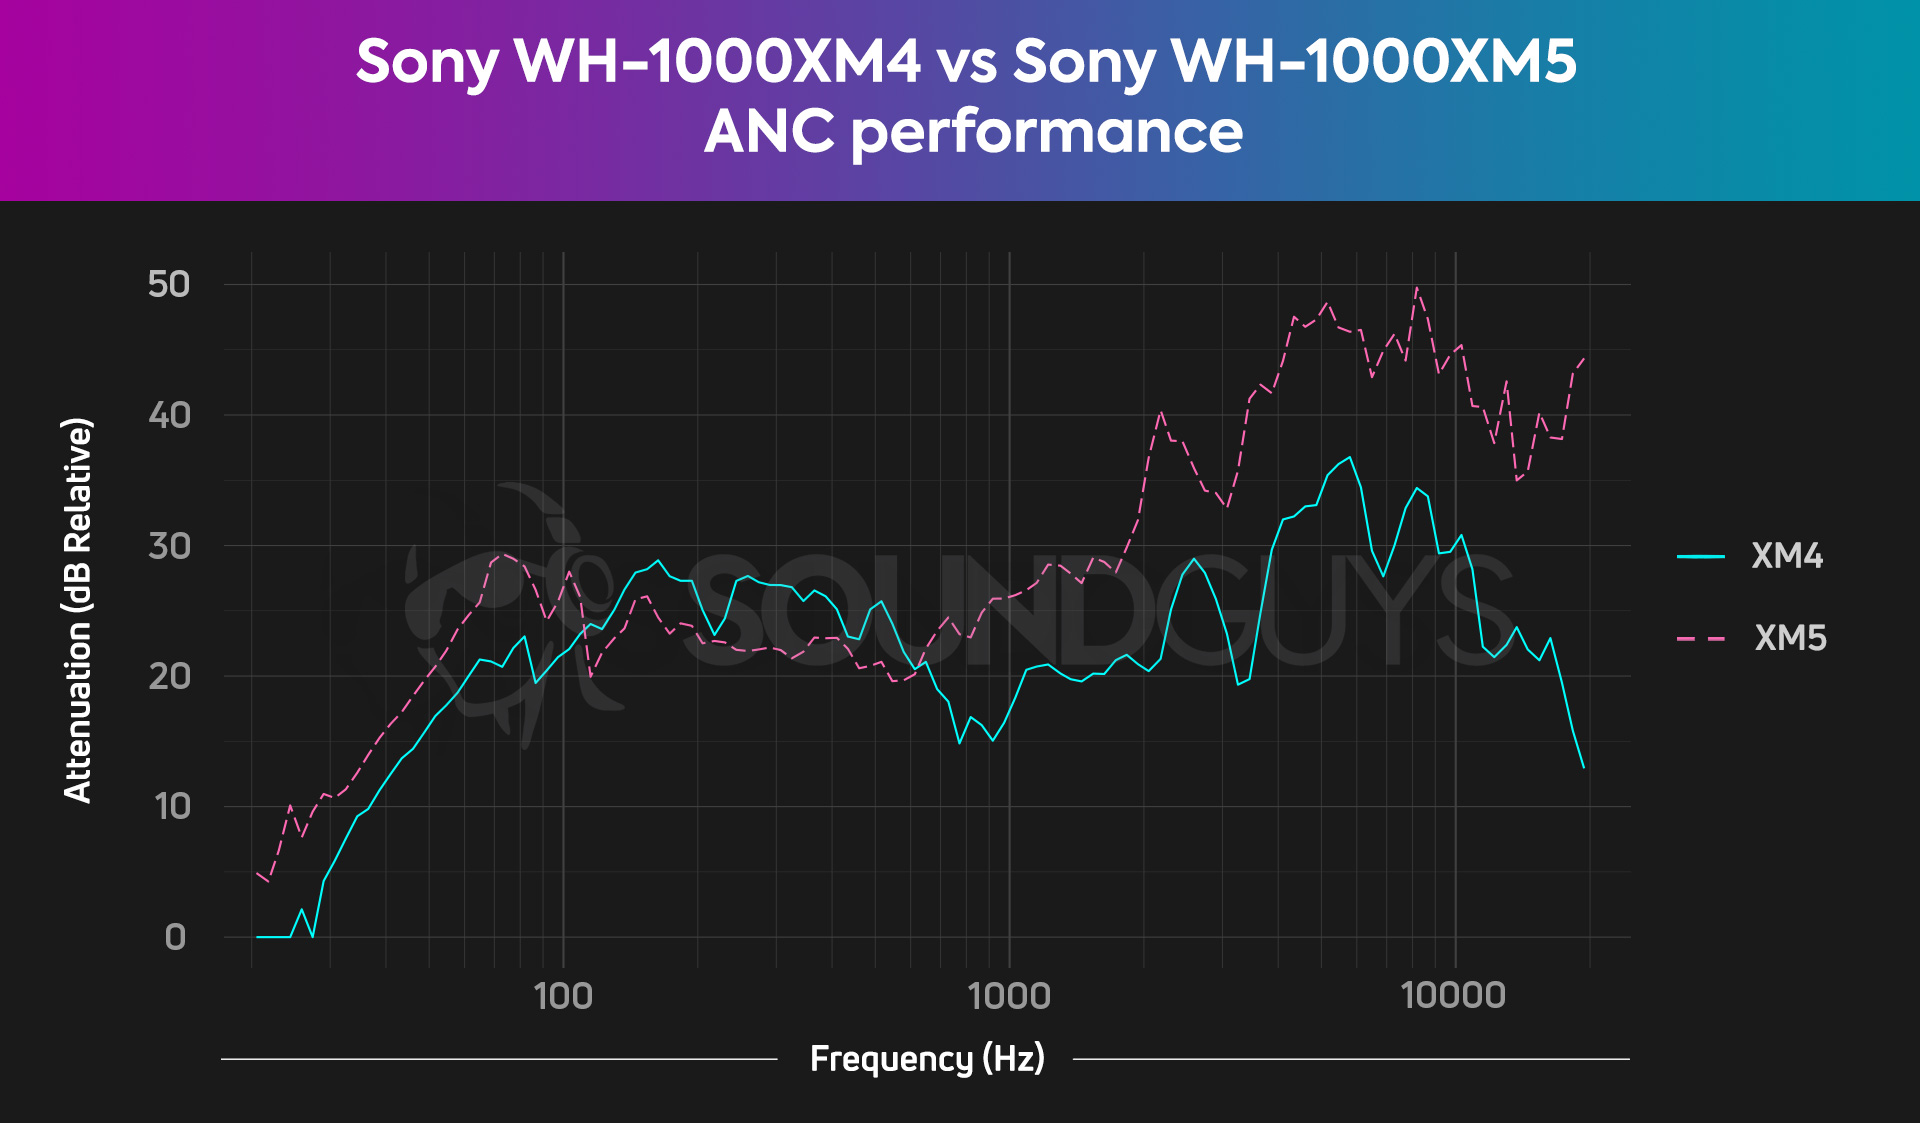 A chart compares the ANC performance of the Sony WH-1000XM4 and WH-1000XM5 Bluetooth headphones, revealing the XM5 to be the better pick in this regard.